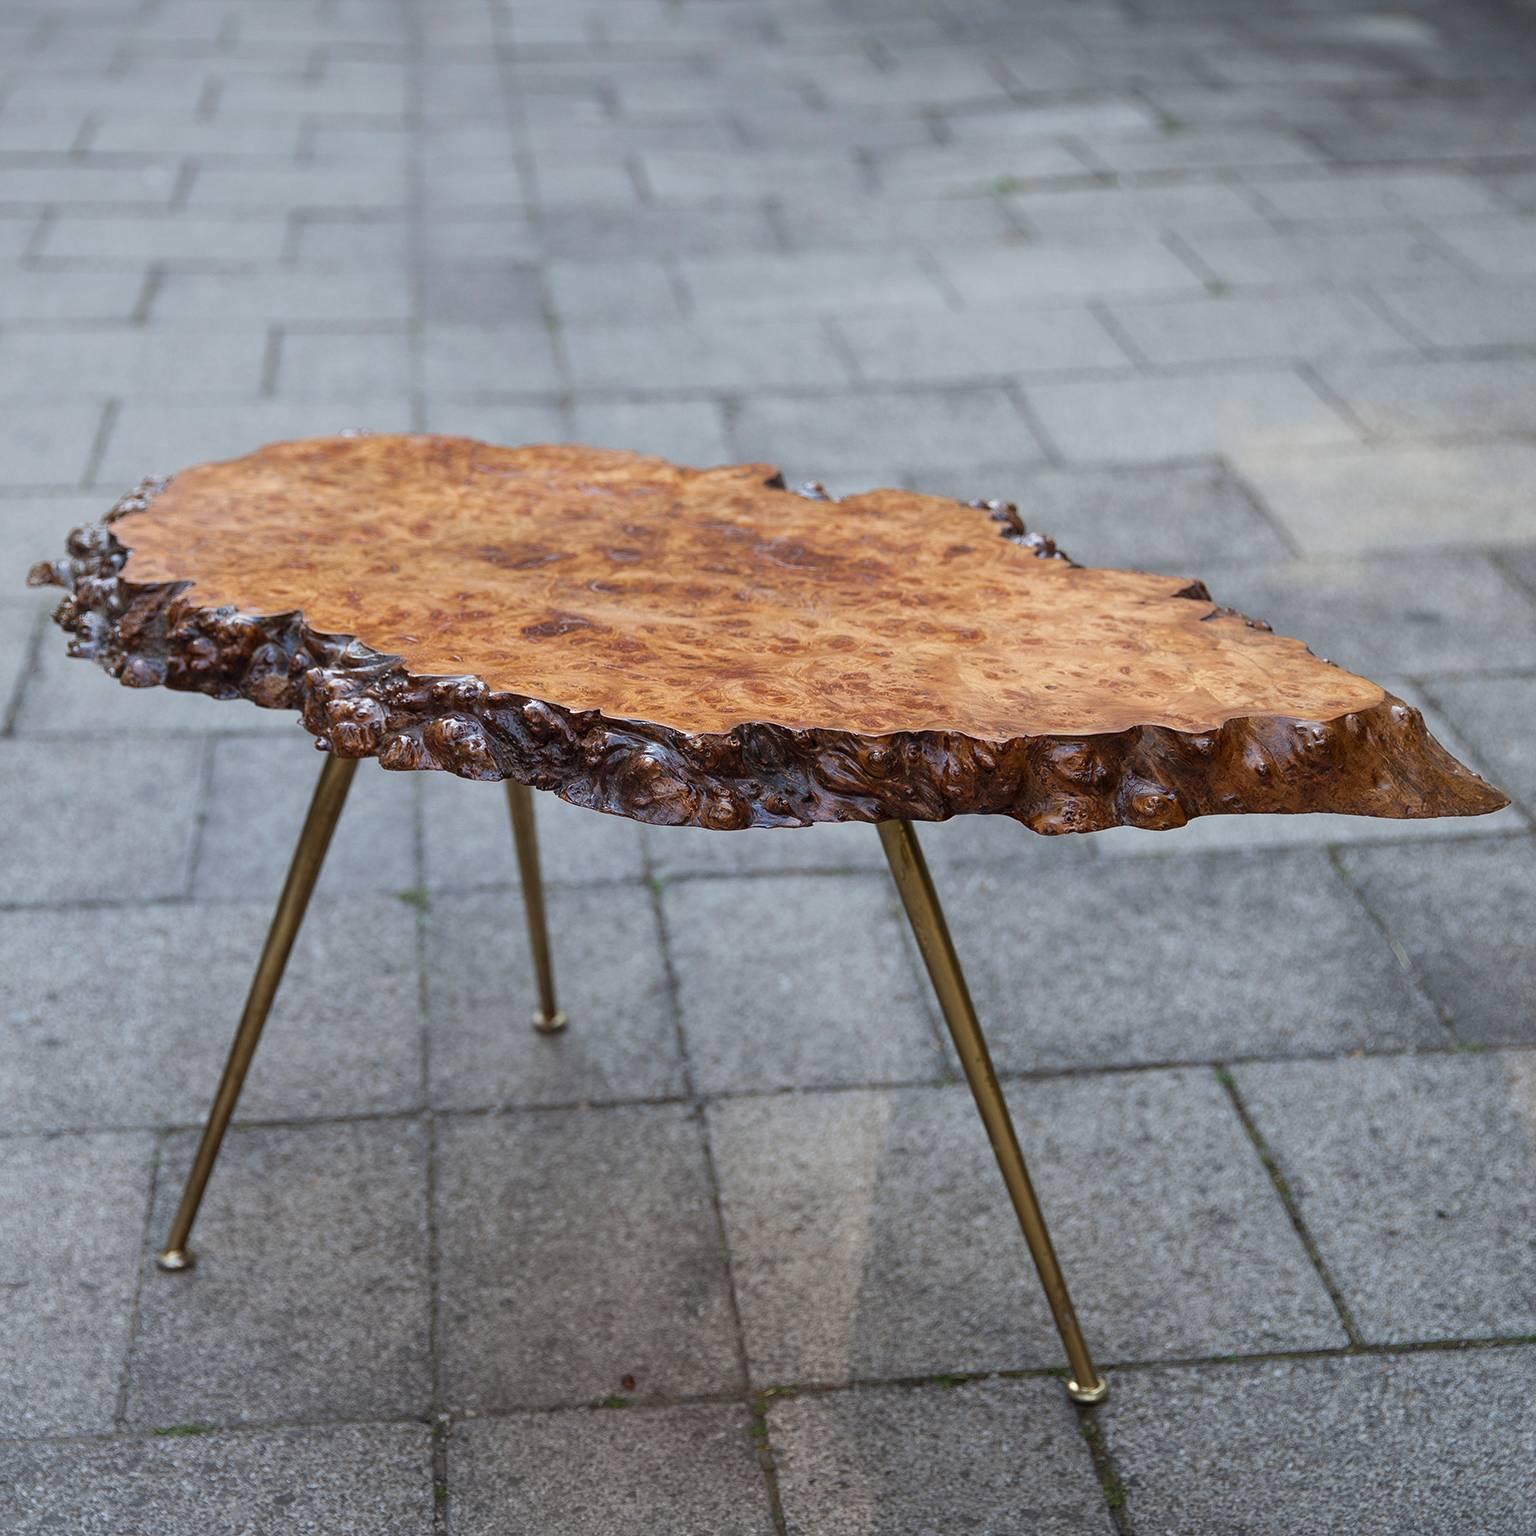 Wonderful side table in the style of Nakashima, gorgeous burl woodwork and tripod brass legs.